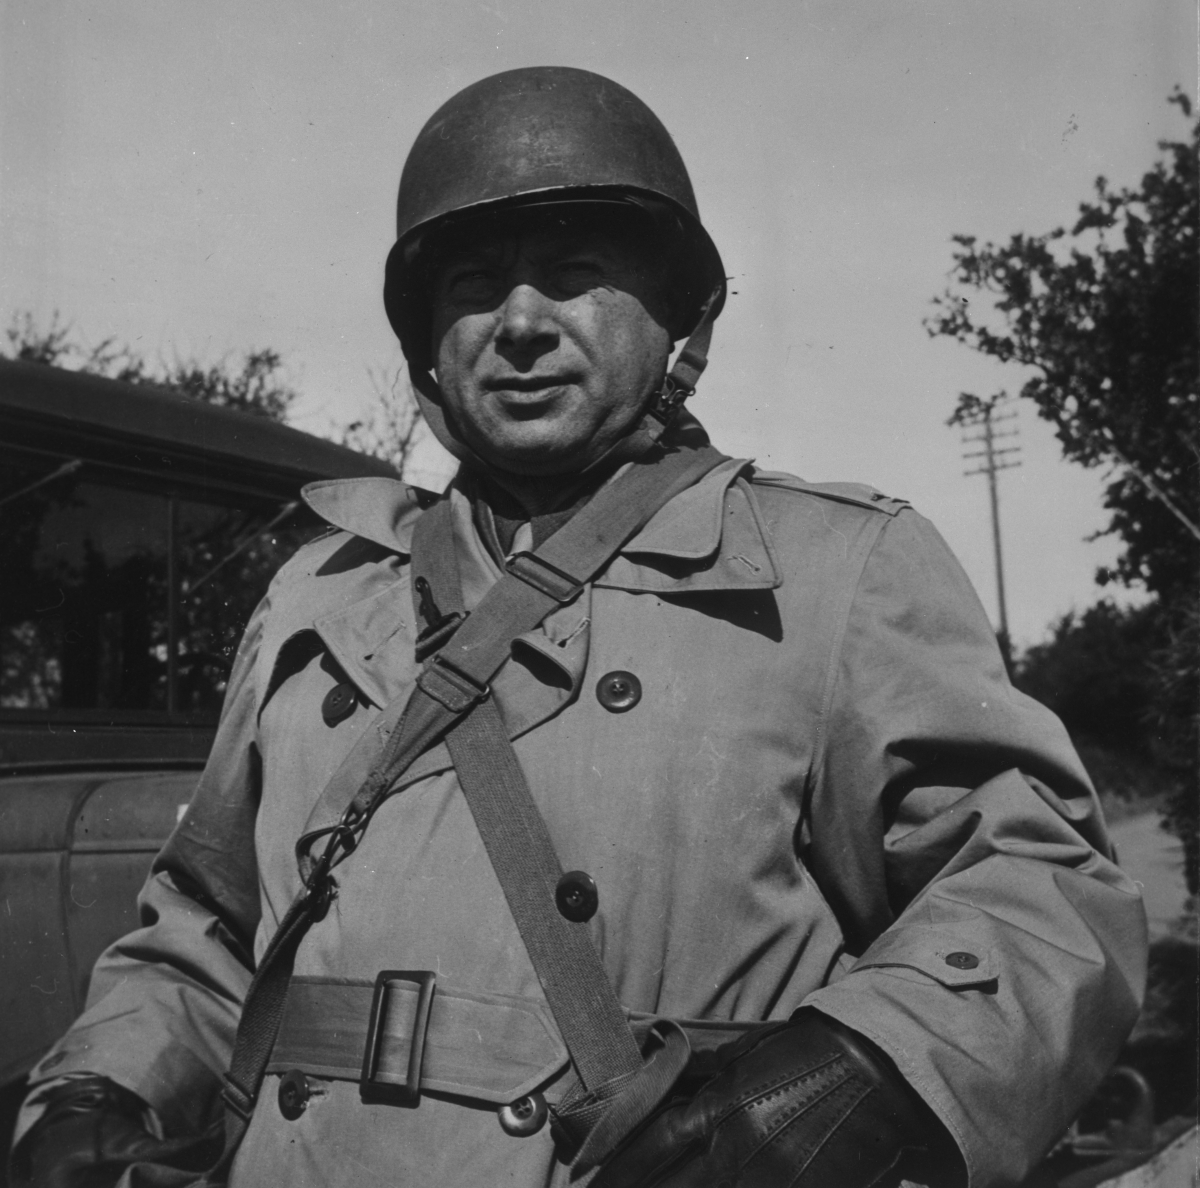 Sarnoff in uniform in the Army